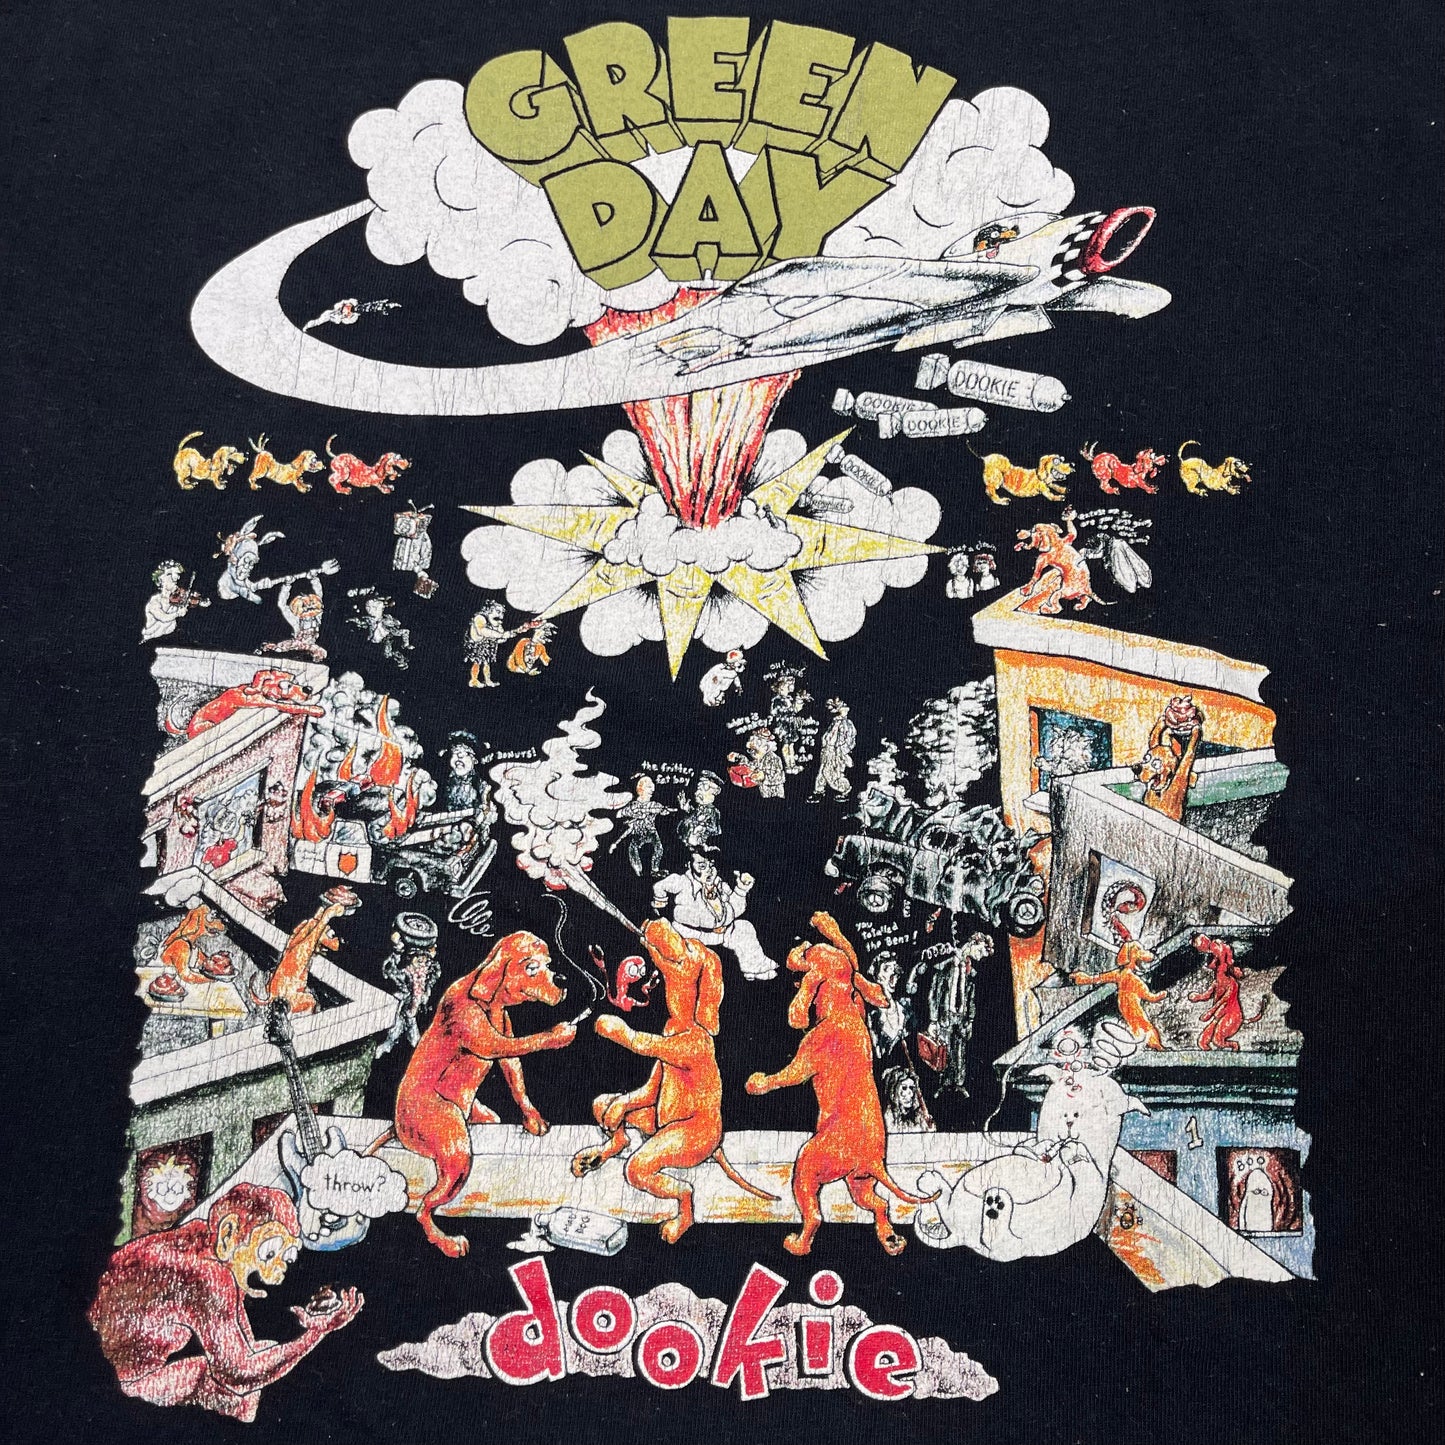 THRIFTED “GREEN DAY” TEE